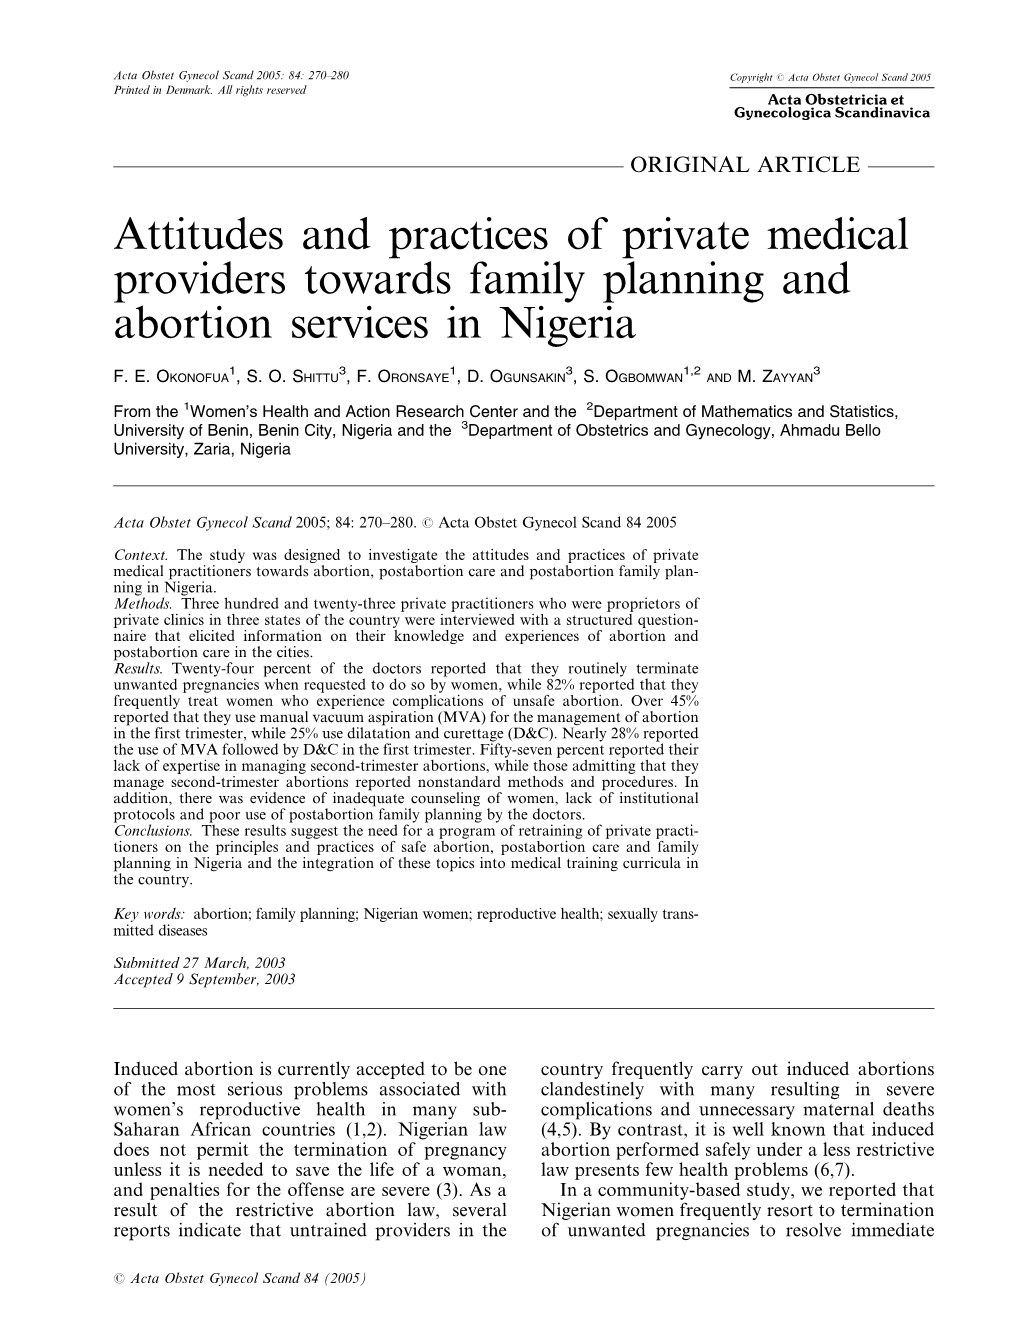 Attitudes and Practices of Private Medical Providers Towards Family Planning and Abortion Services in Nigeria